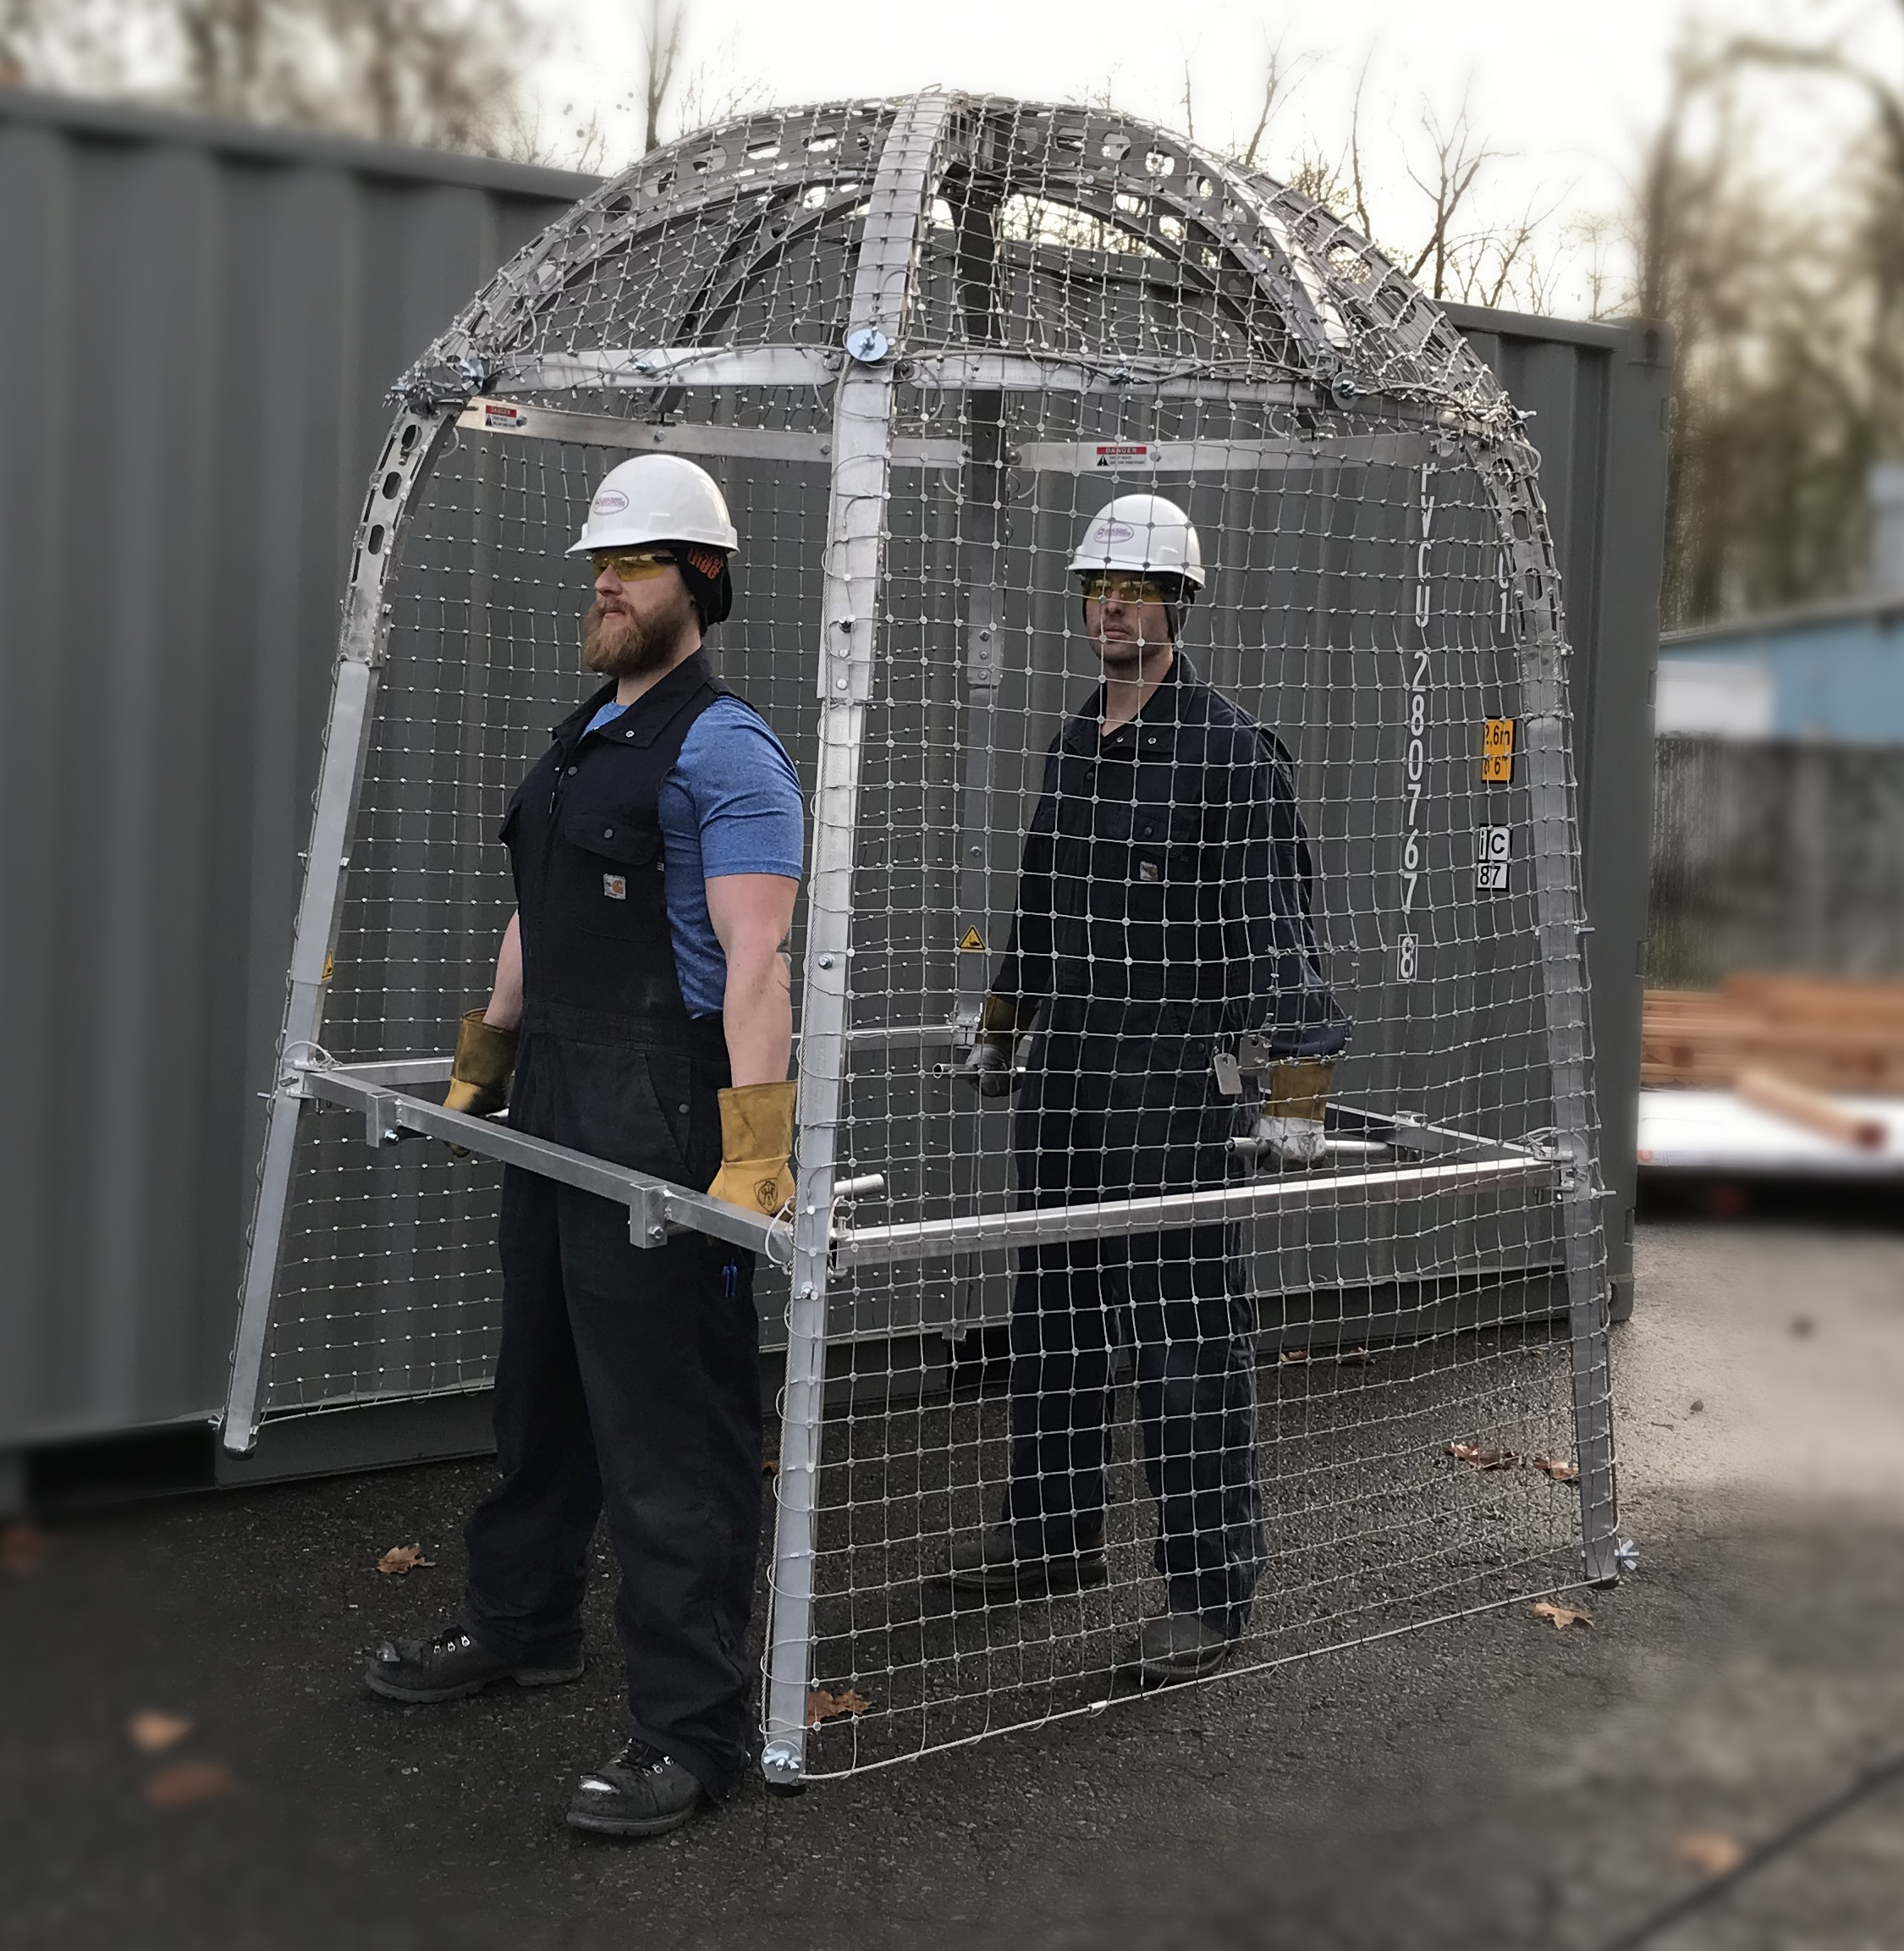 Safety Inspection Cage Dralo w men WEB